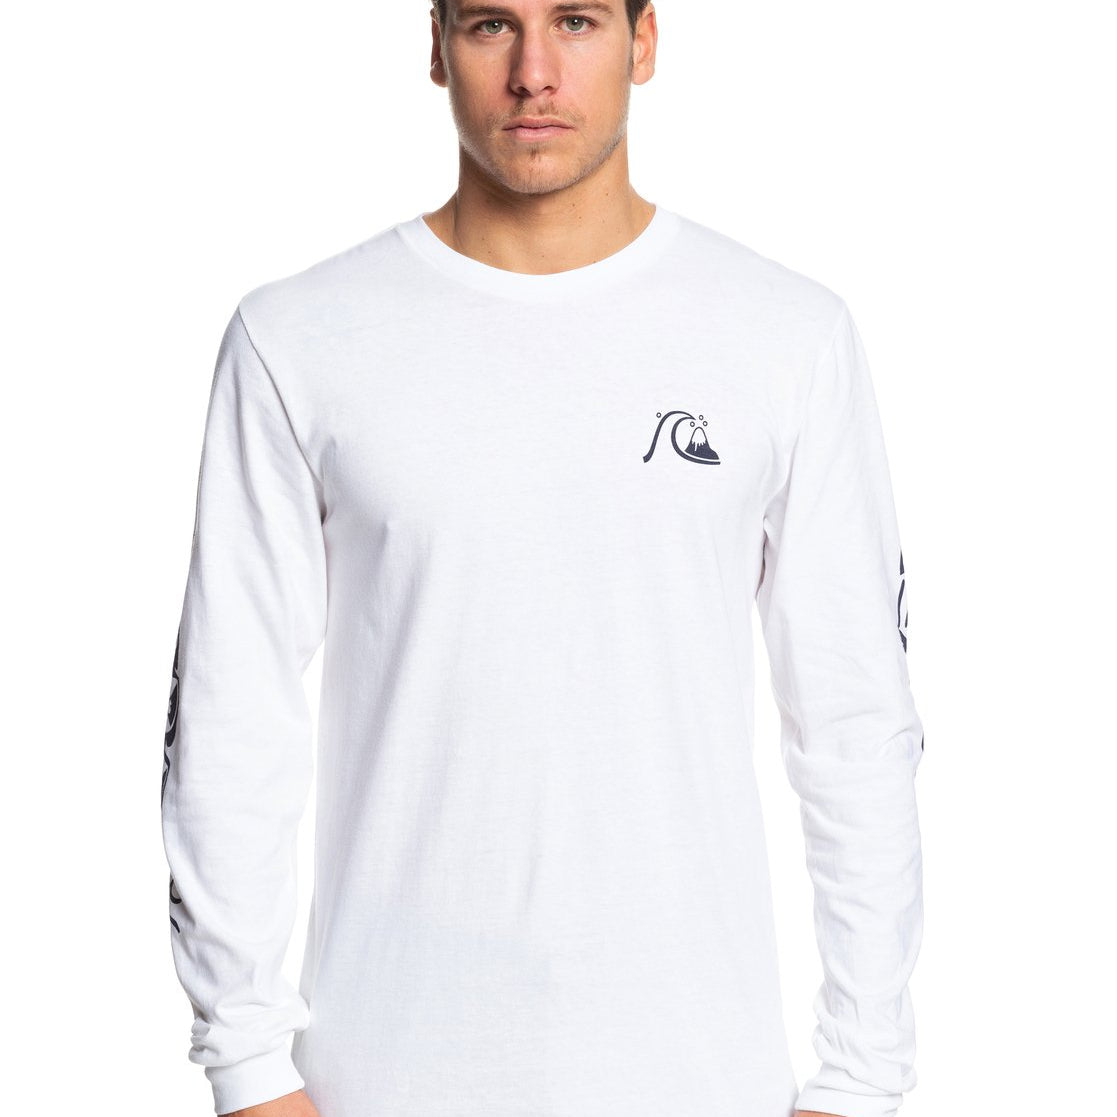 Quiksilver Too Many Rules Tee WBB0 S